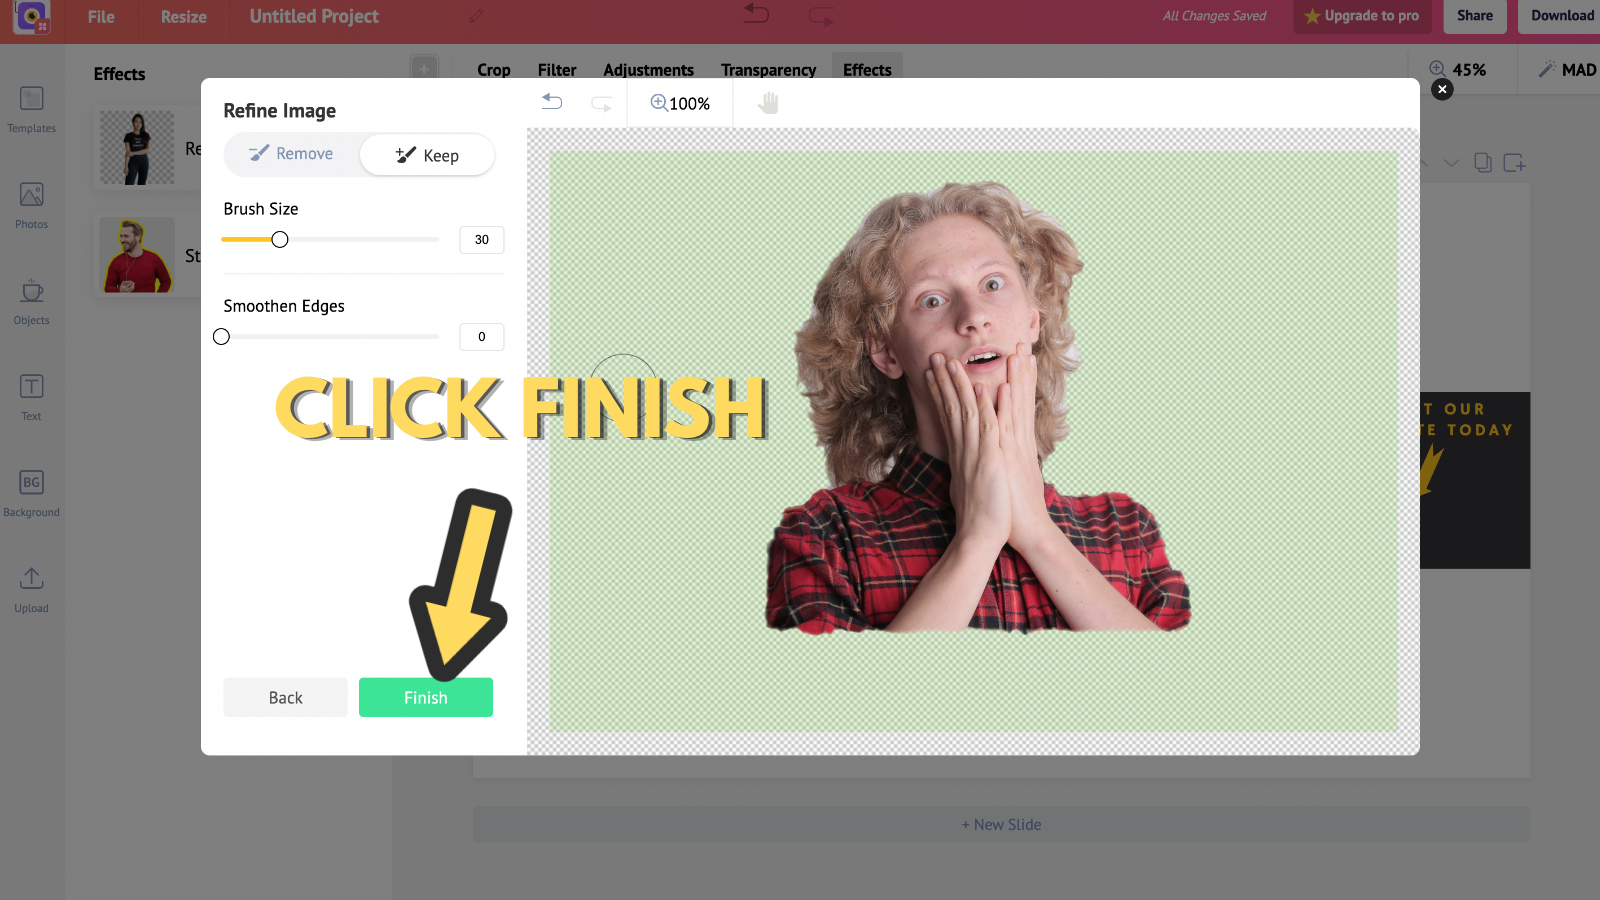 Screenshot that prompts you to click the Finish button (to make 2048 x 1152 YouTube banner)